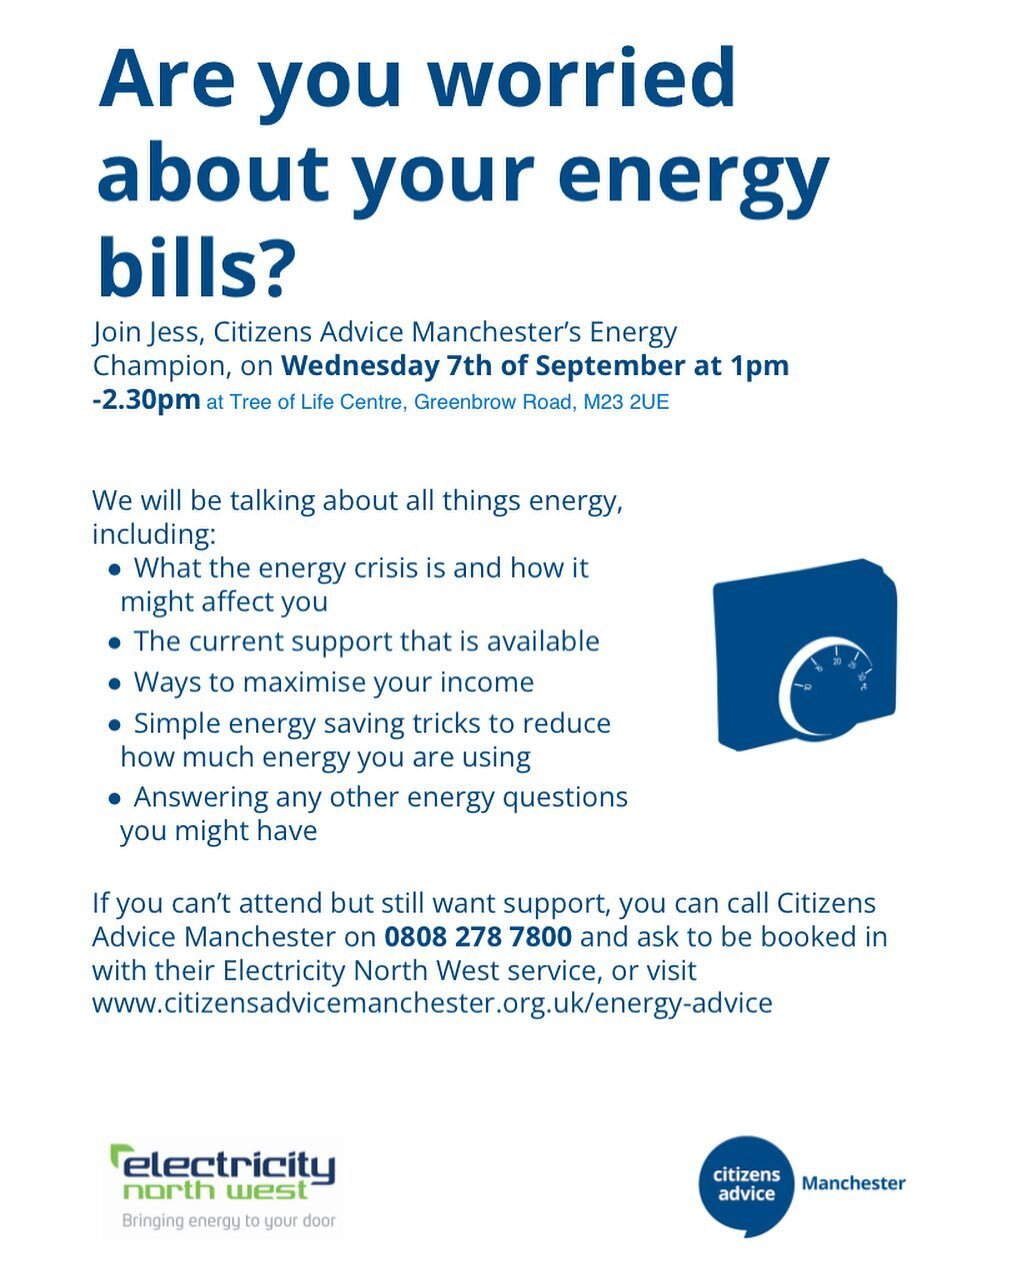 With all the talk of the utility prices going up over the next year, this winter is looking like it&rsquo;s going to be a bit grim 😔

Get that little bit warmer as @citizensadvicemcr drop in to give us a Consumer Energy Session this Wednesday 7th Se